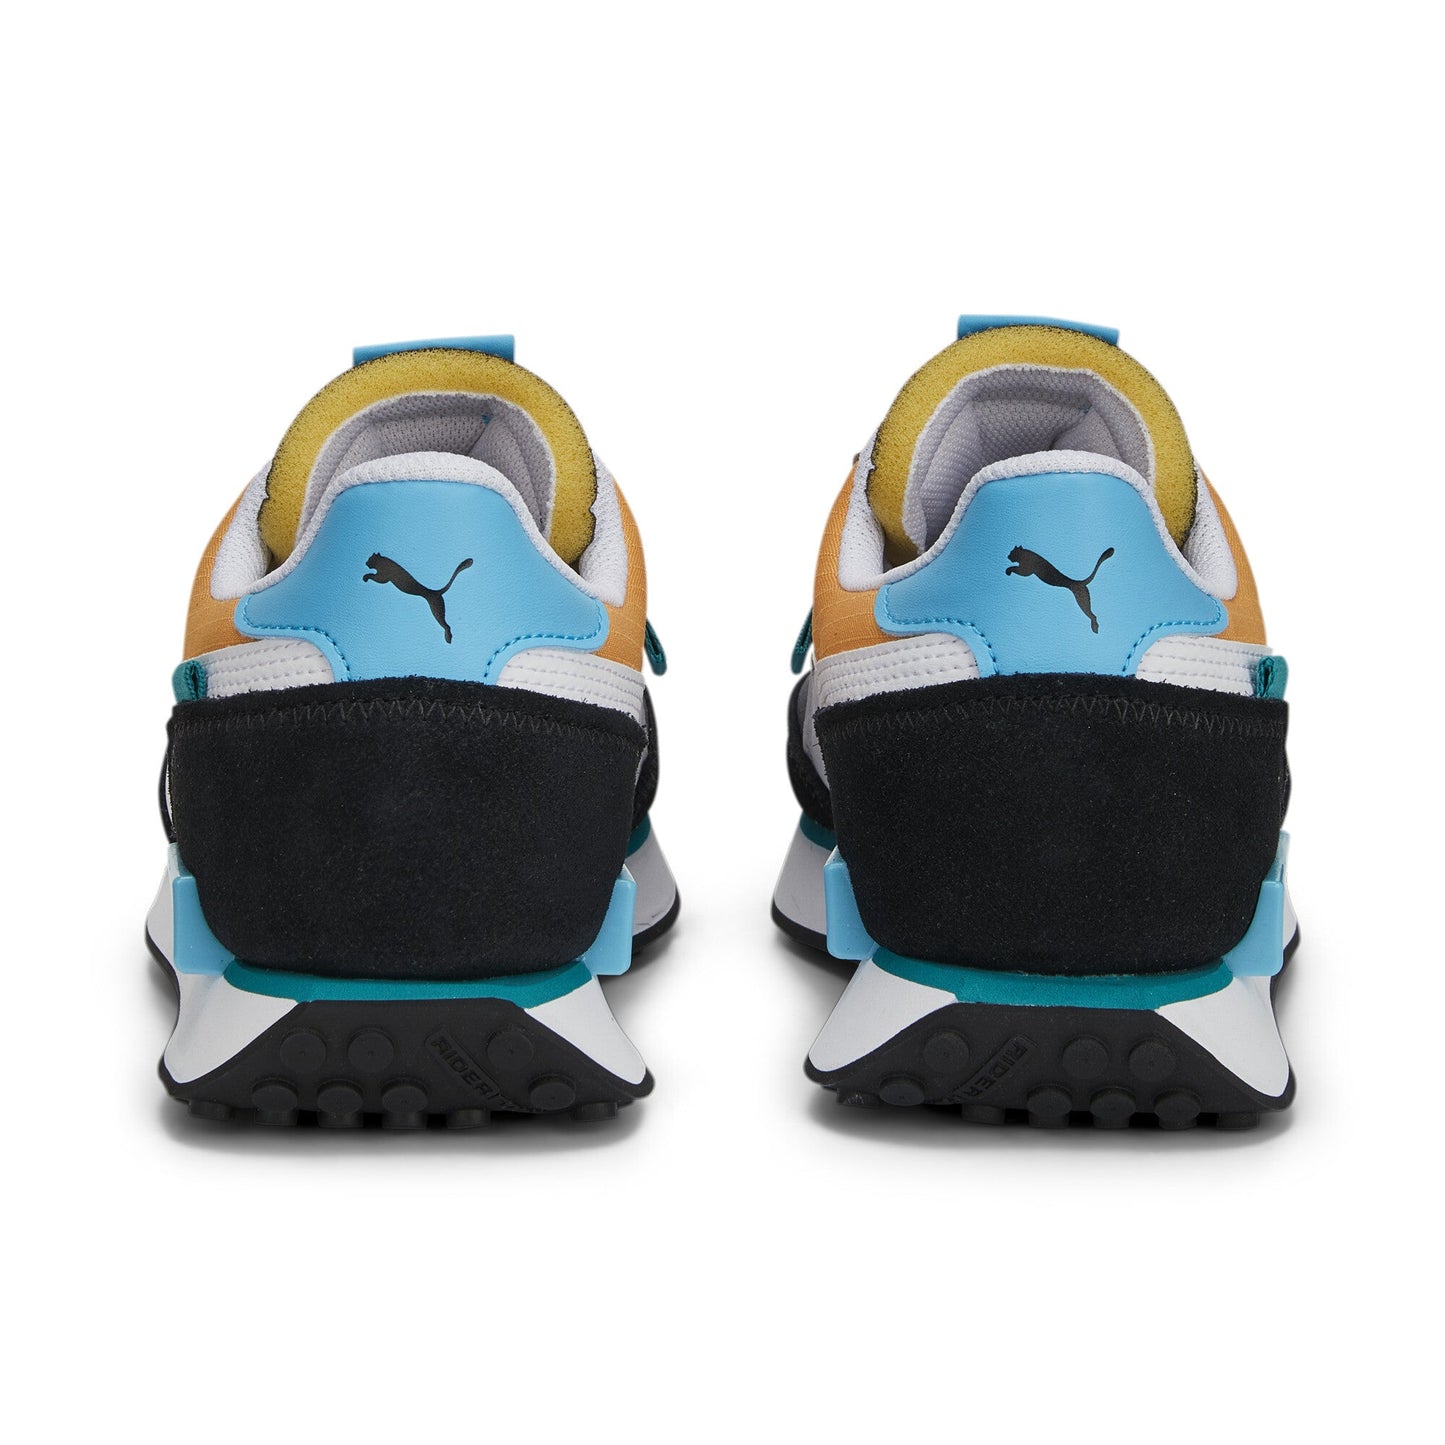 Future Rider Play On Unisex Sneakers